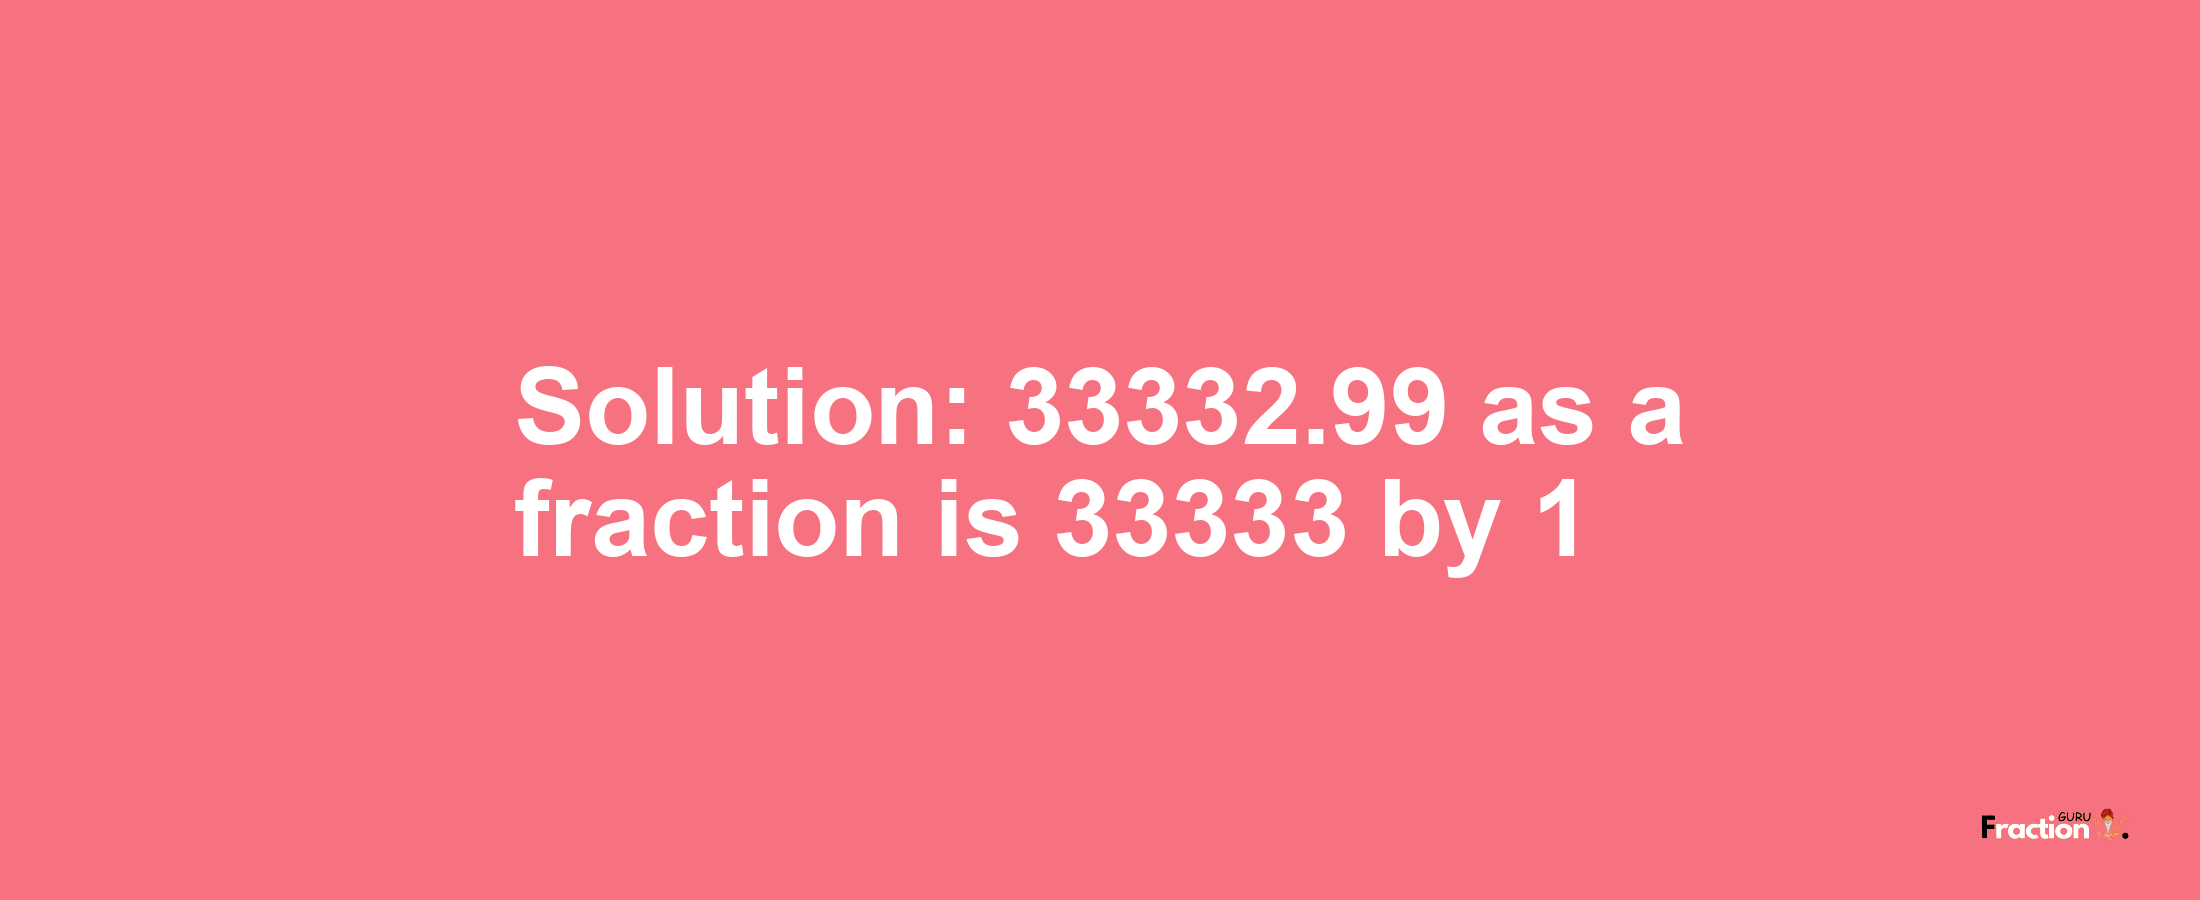 Solution:33332.99 as a fraction is 33333/1